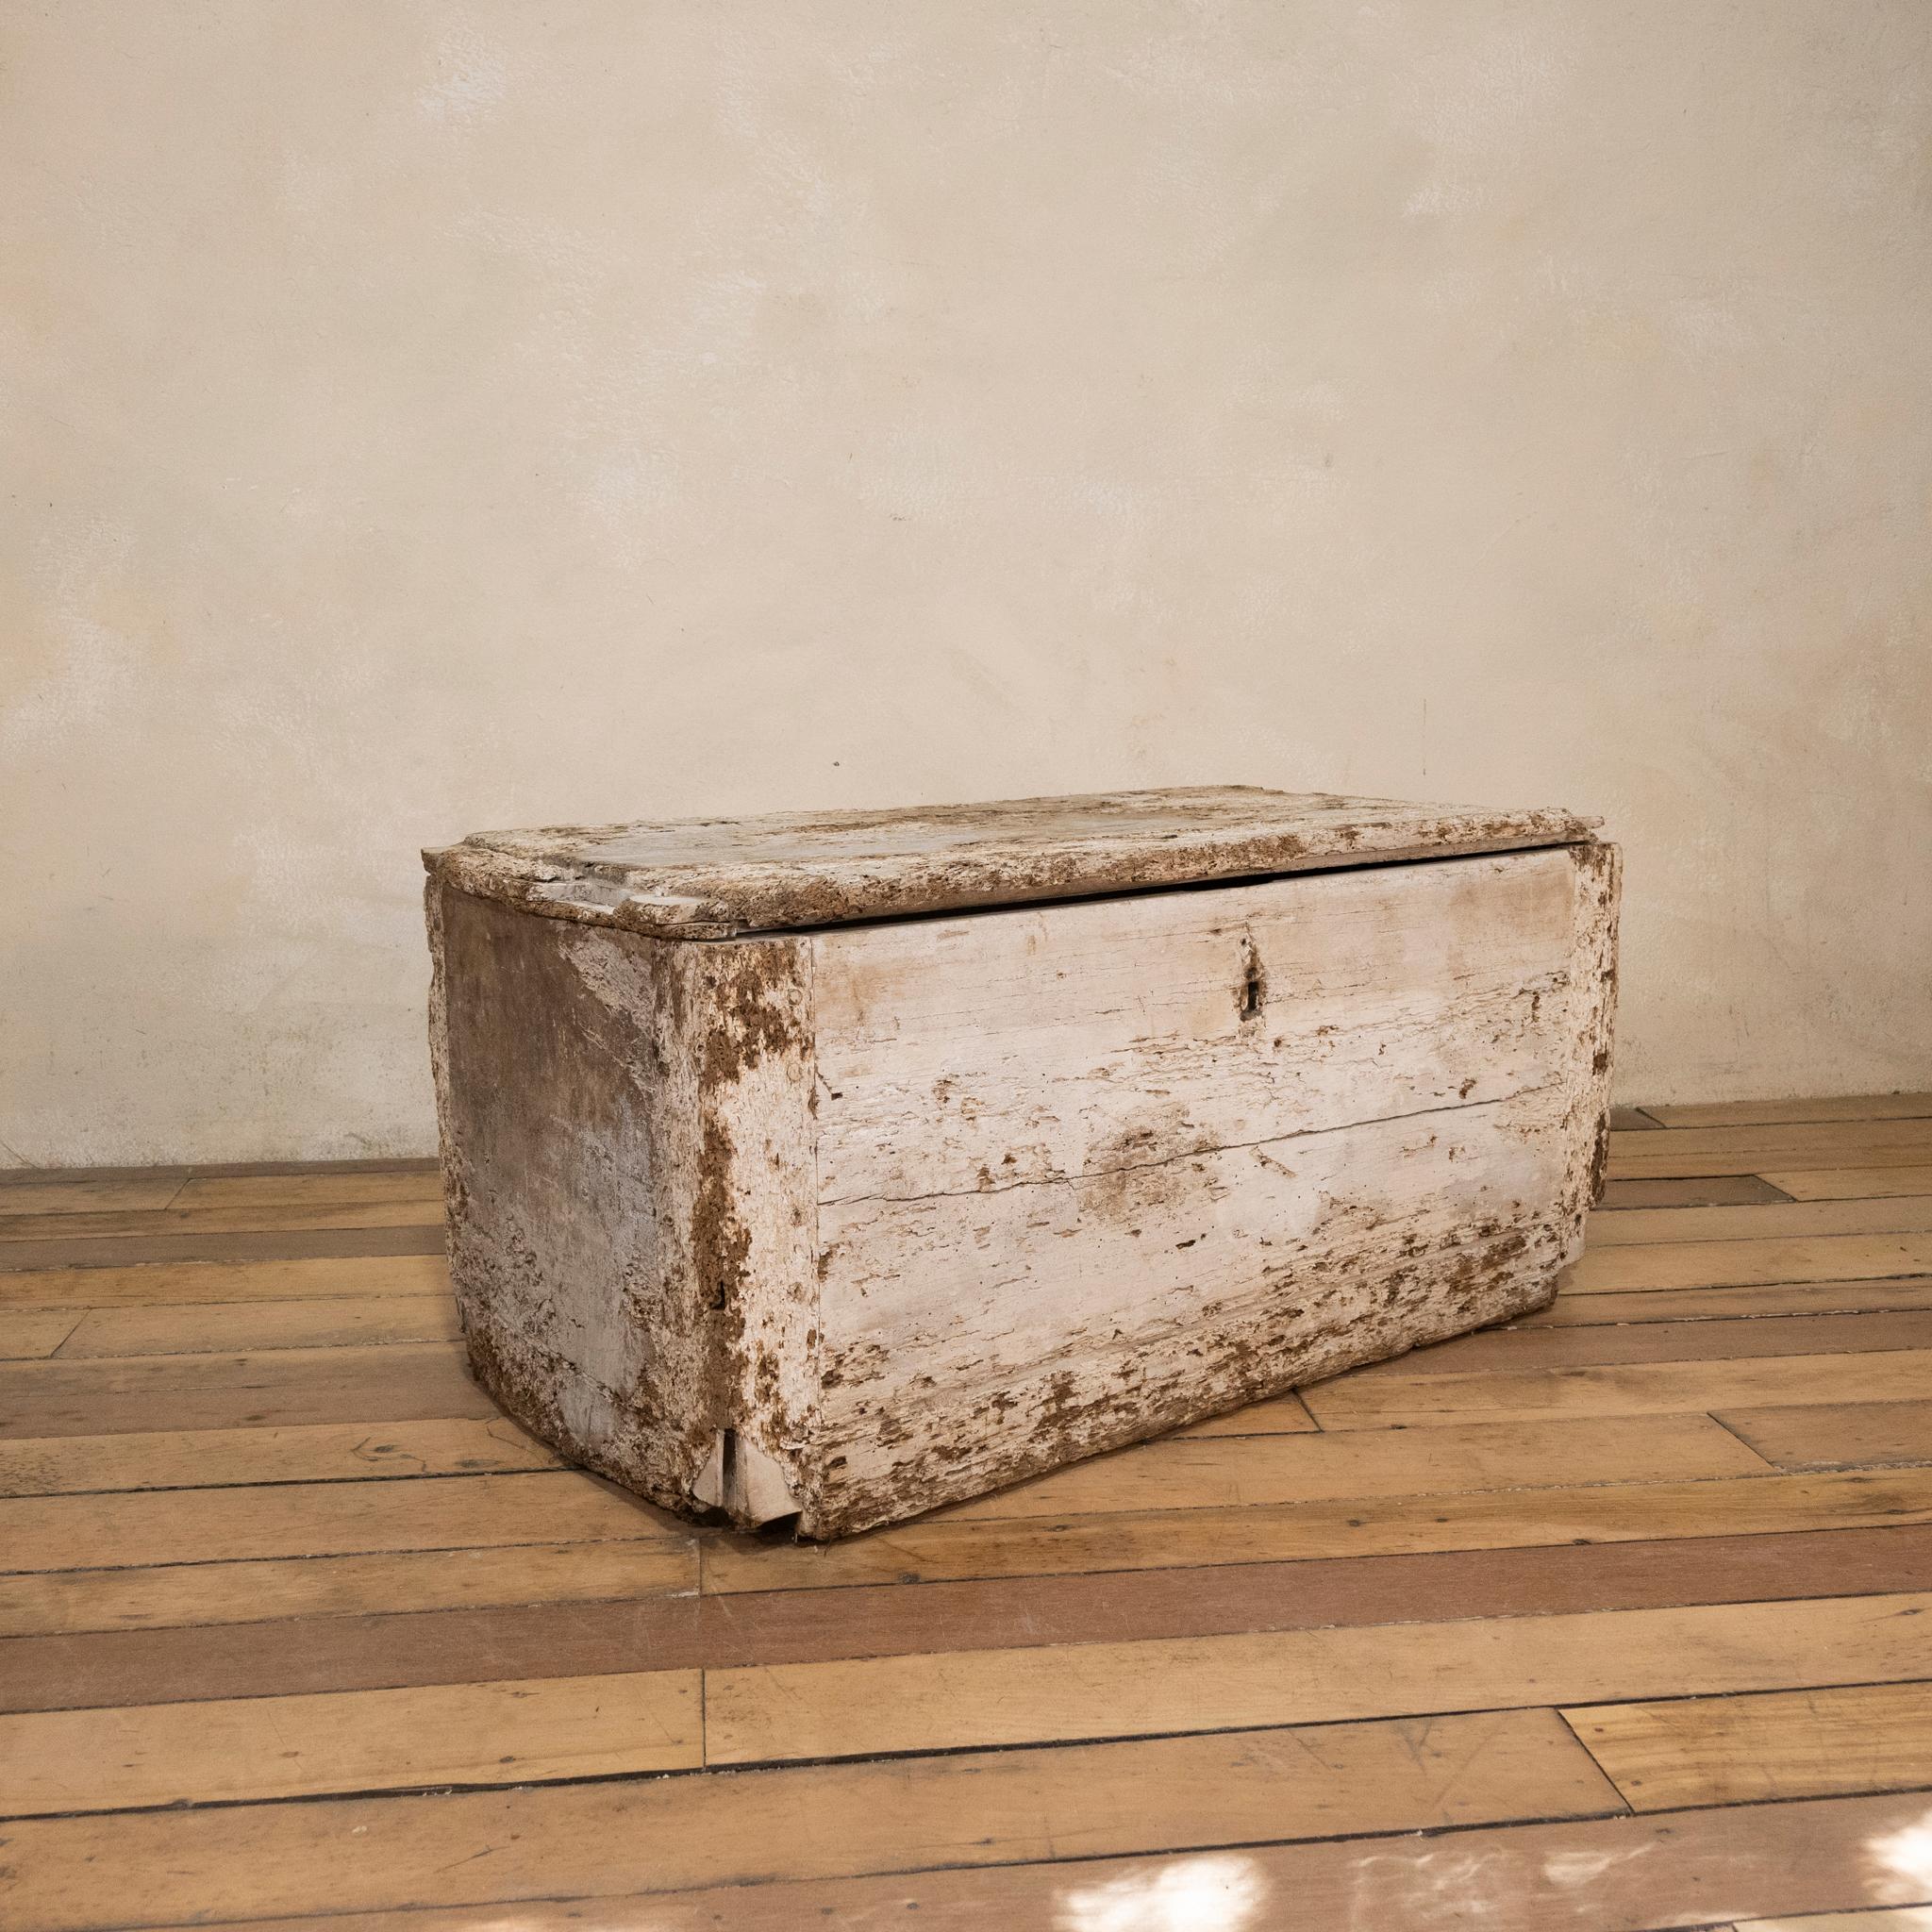 A mid 19th-century rustic country house trunk. Featuring a period whitewash to the exterior. The historic woodworm has created a charming raw design while still being of sturdy solid construction. A lovely piece that would lend itself well as use as